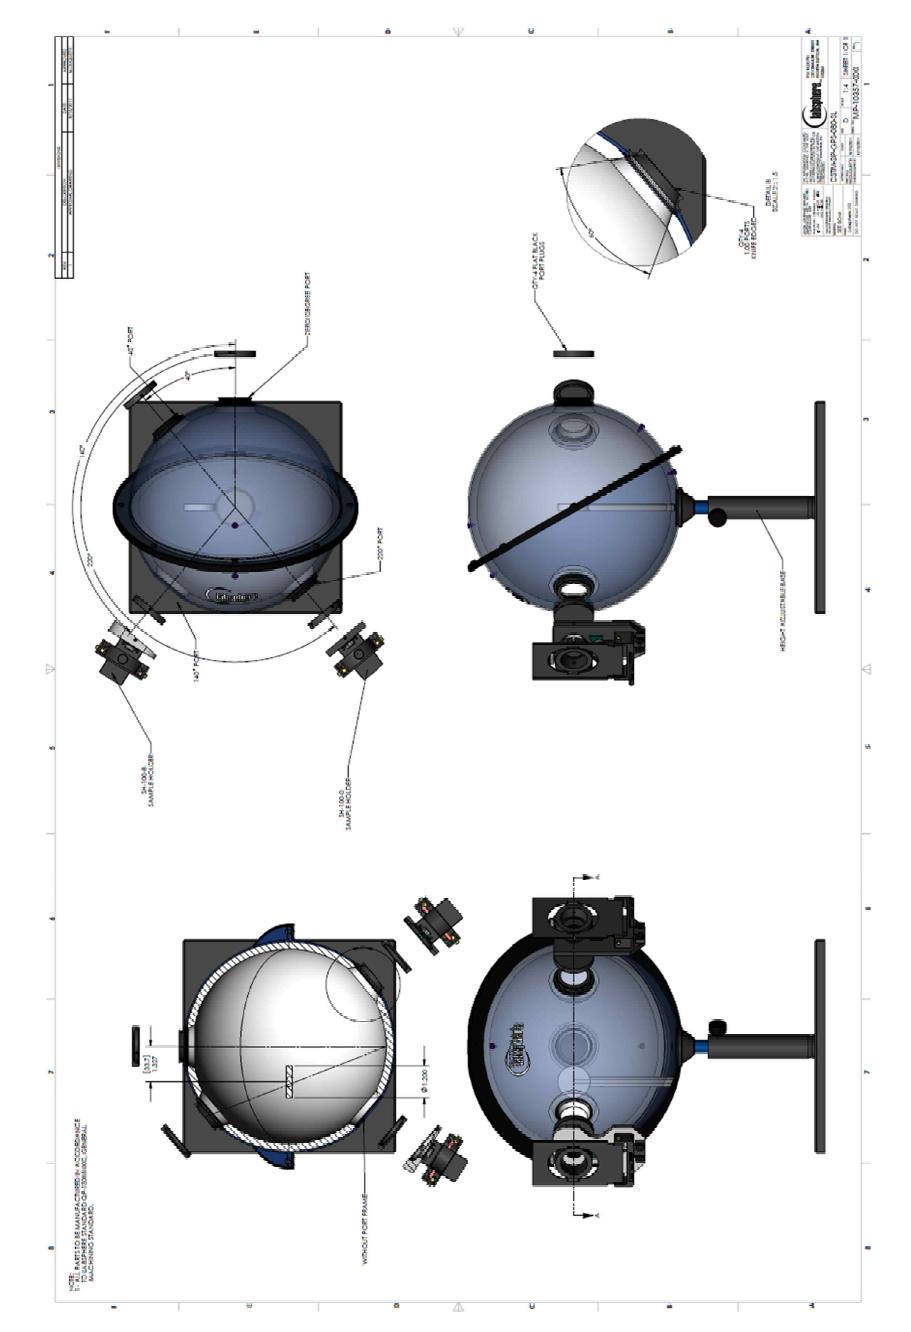 Drawing of the integrating sphere for the absolute diffuse reflectance measurement system.